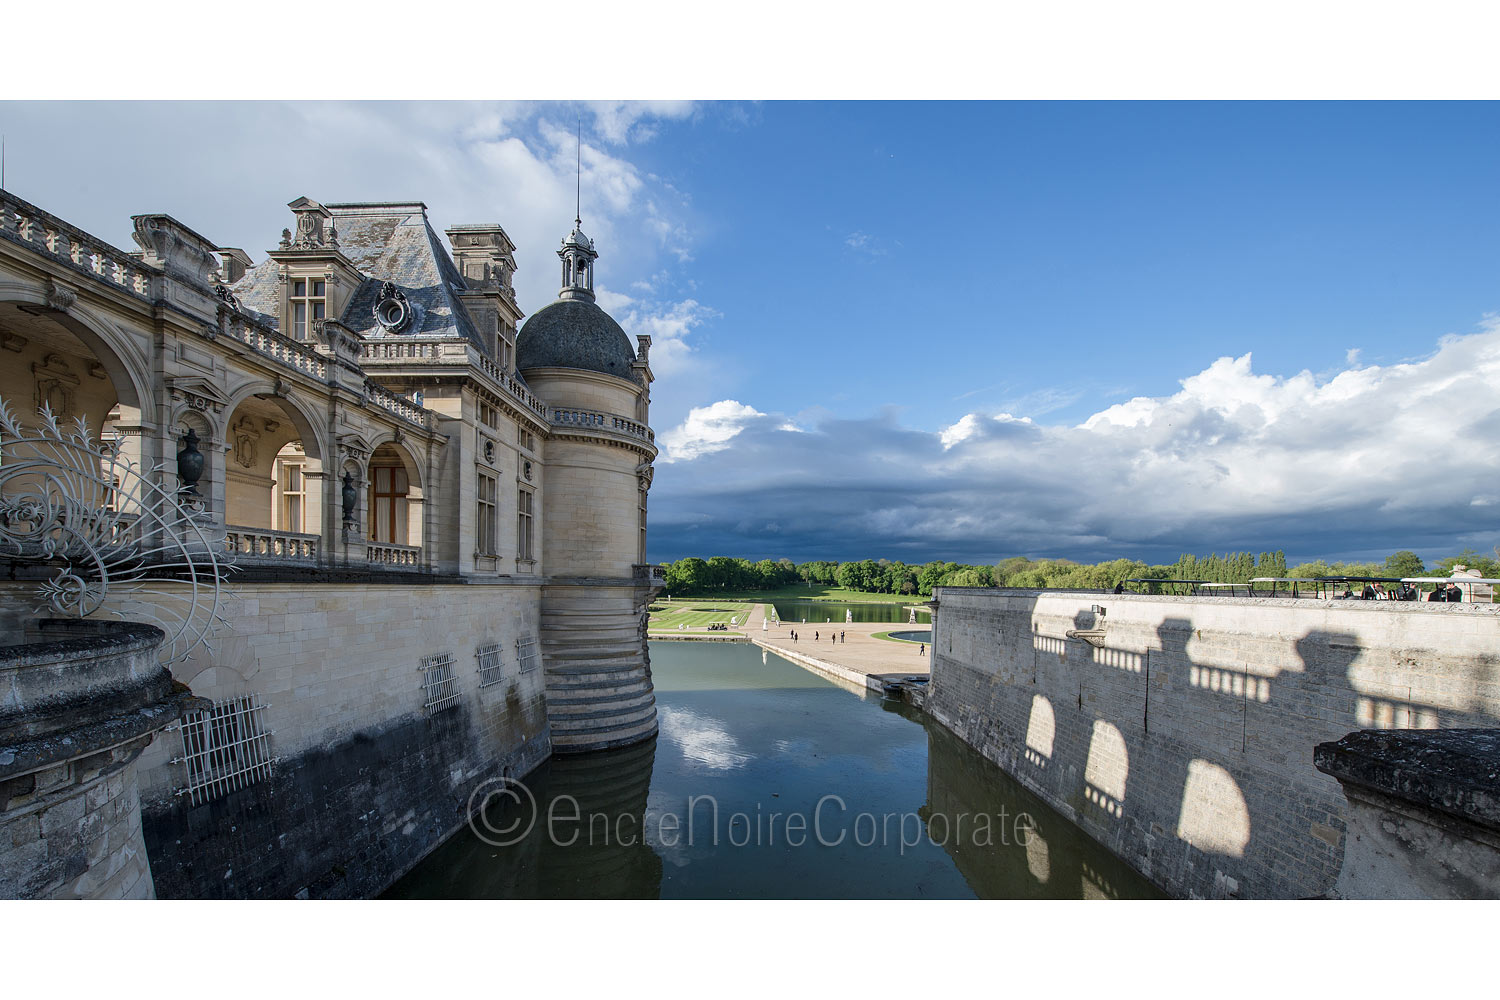 Photographers Events Chantilly